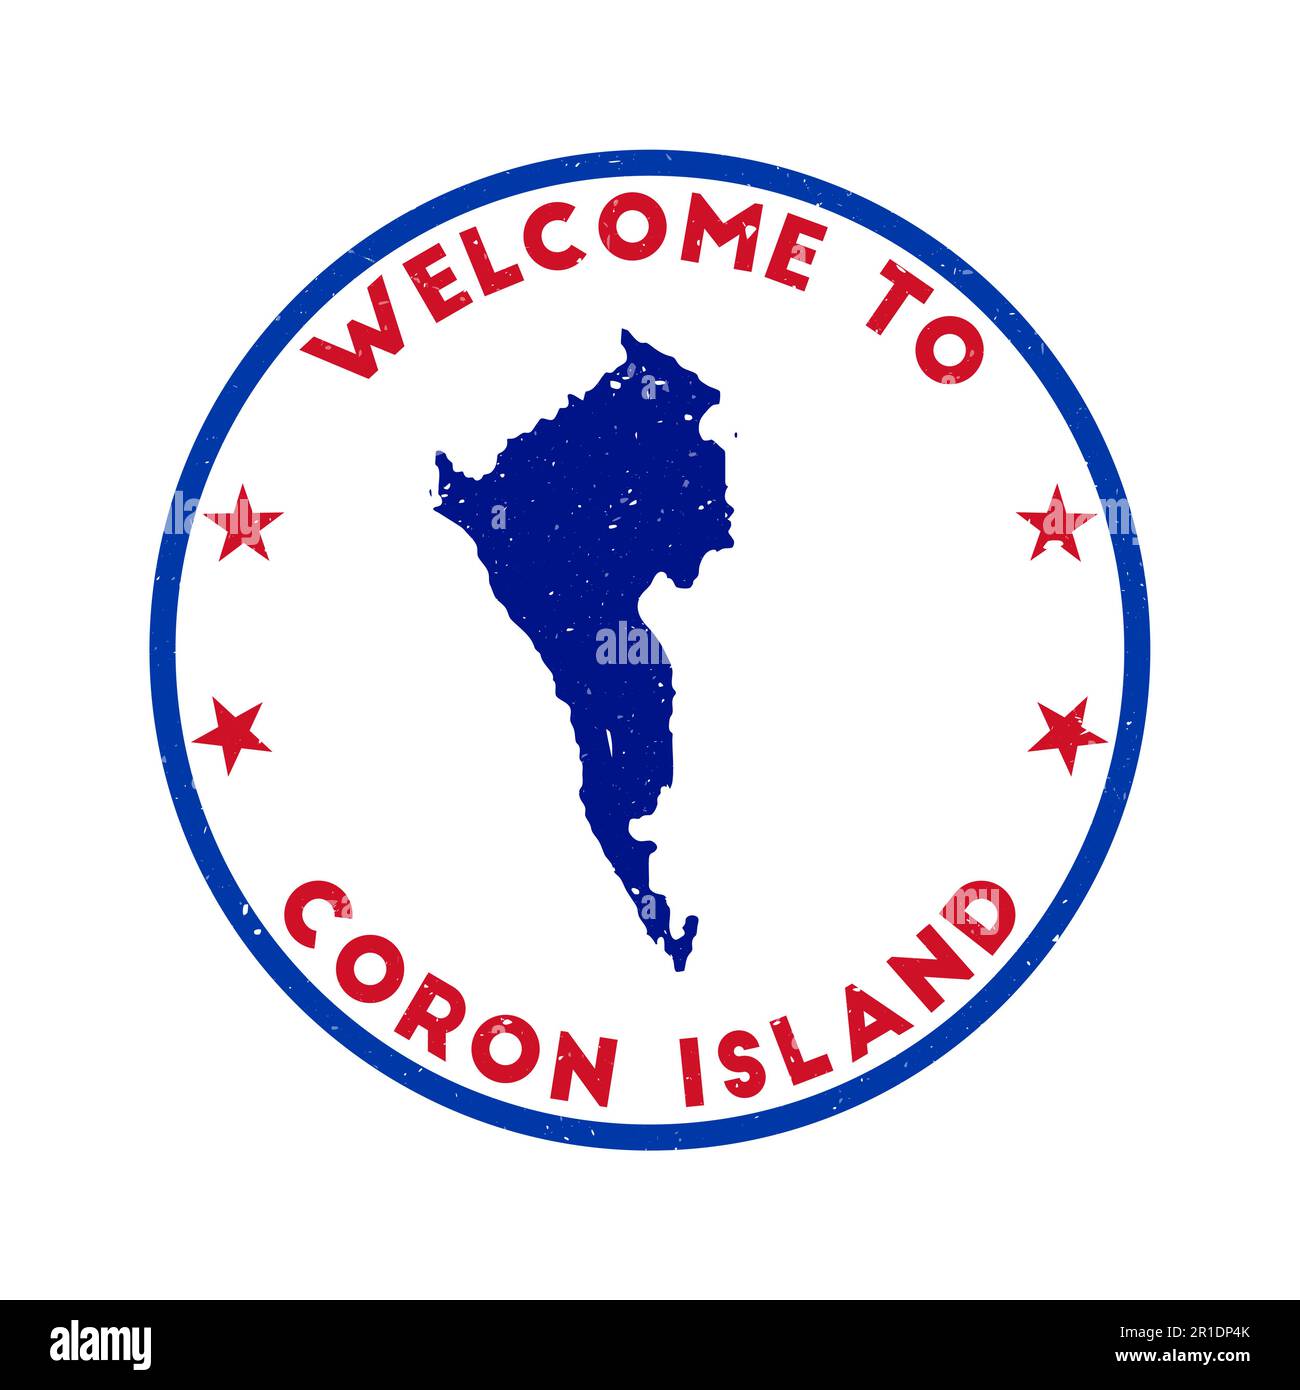 Welcome to Coron Island stamp. Grunge island round stamp with texture in Super Rose Red color theme. Vintage style geometric Coron Island seal. Attrac Stock Vector